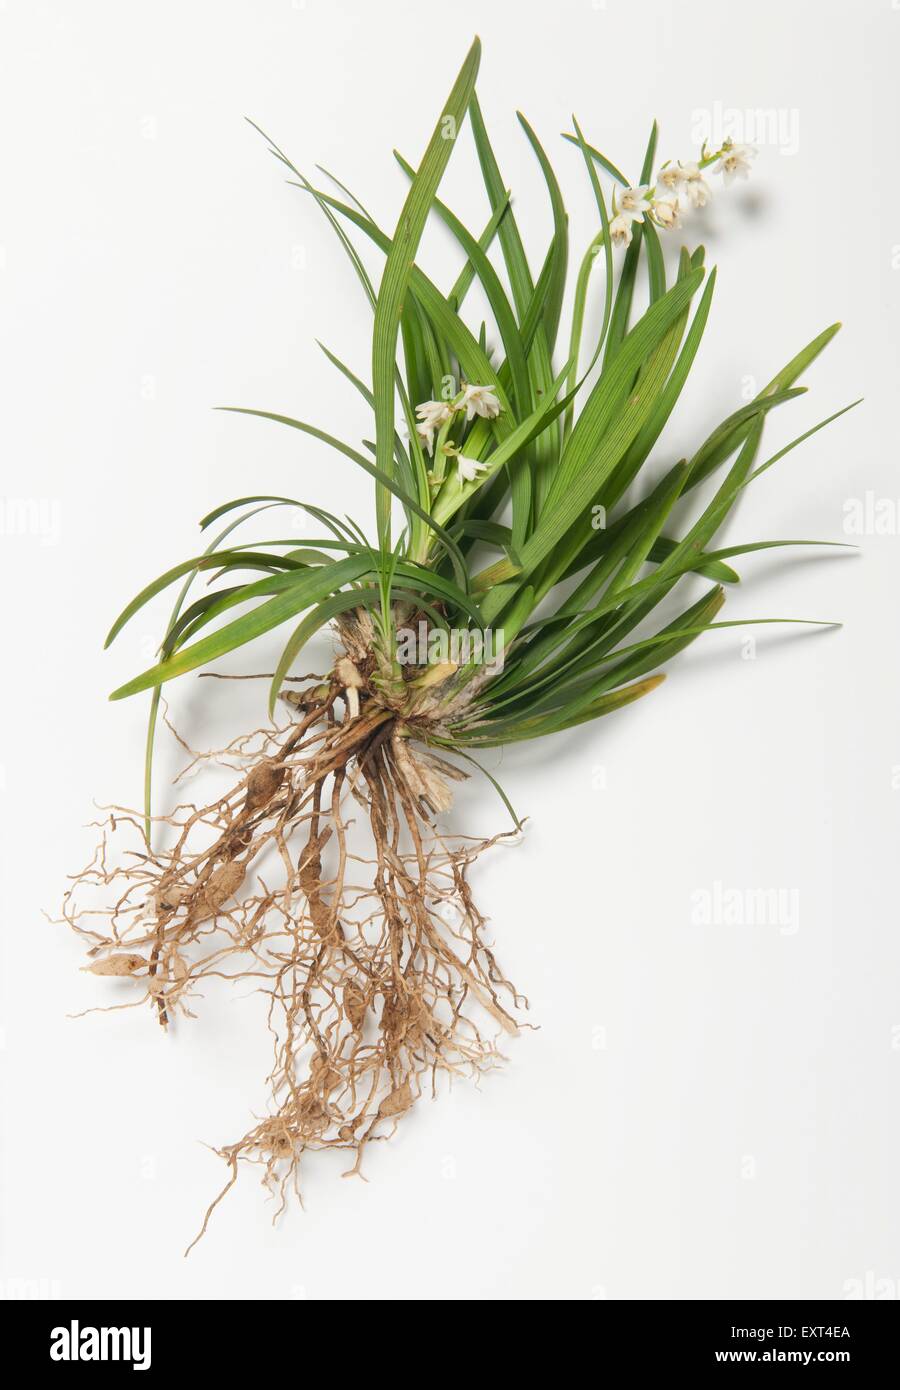 Ophiopogon japonicus (Mondo grass) plant with leaves, flowers and roots Stock Photo